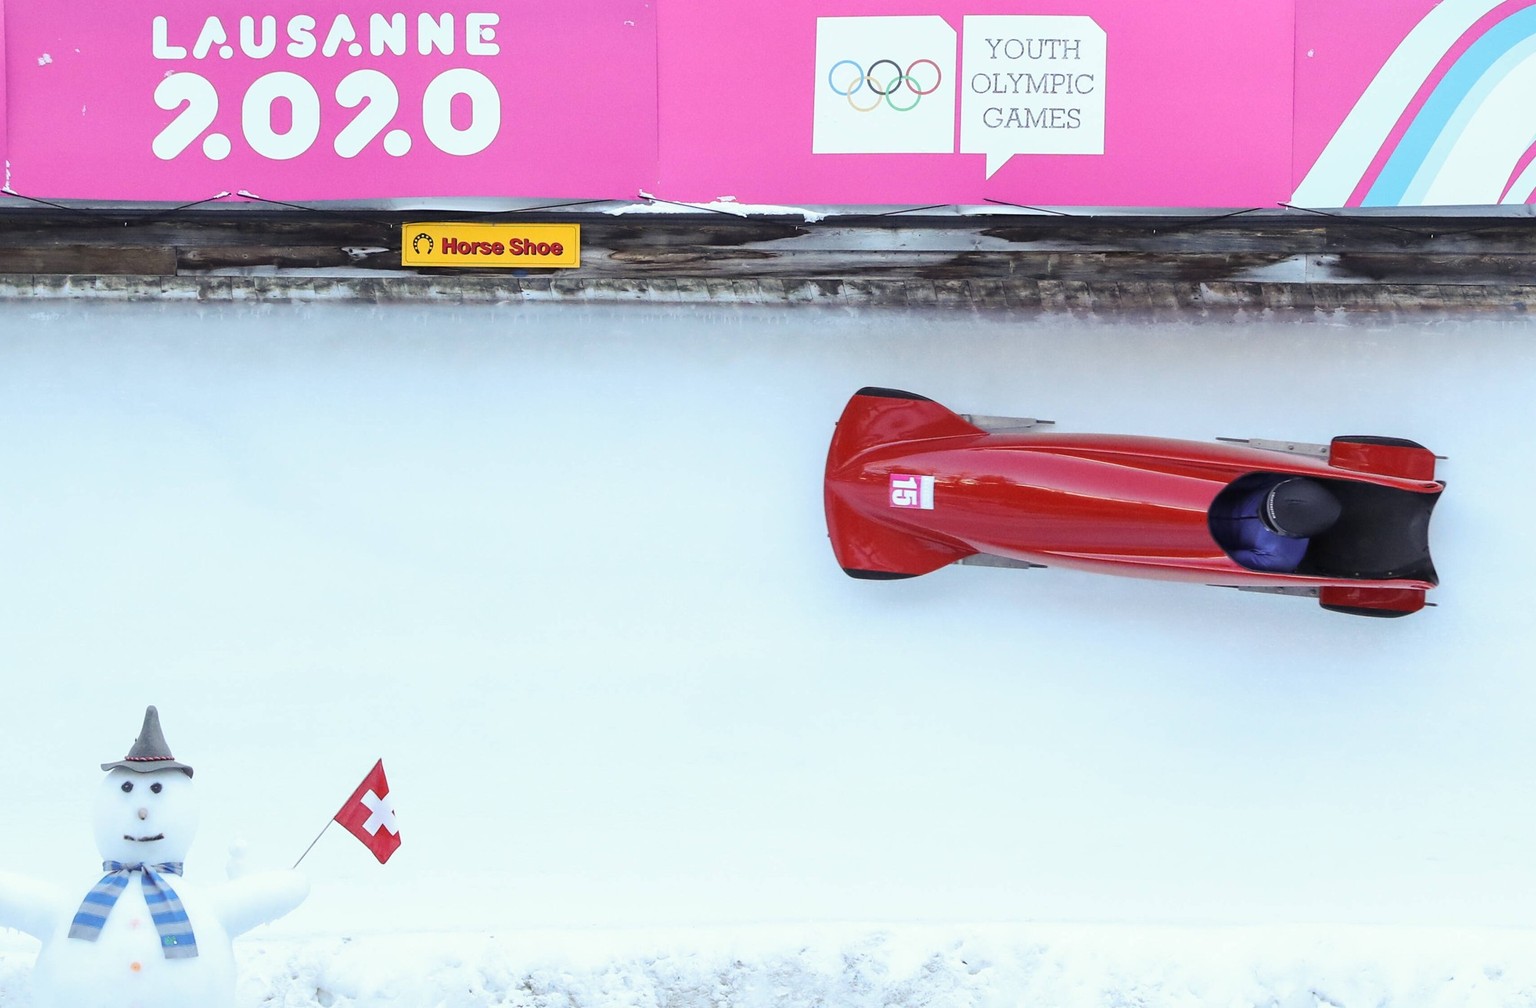 200121 -- ST. MORITZ, Jan. 21, 2020 -- Quentin Sanzo of Liechtenstein competes during the men s monobob competition at the Lausanne 2020 Winter Youth Olympic Games, Olympische Spiele, Olympia, OS YOG ...